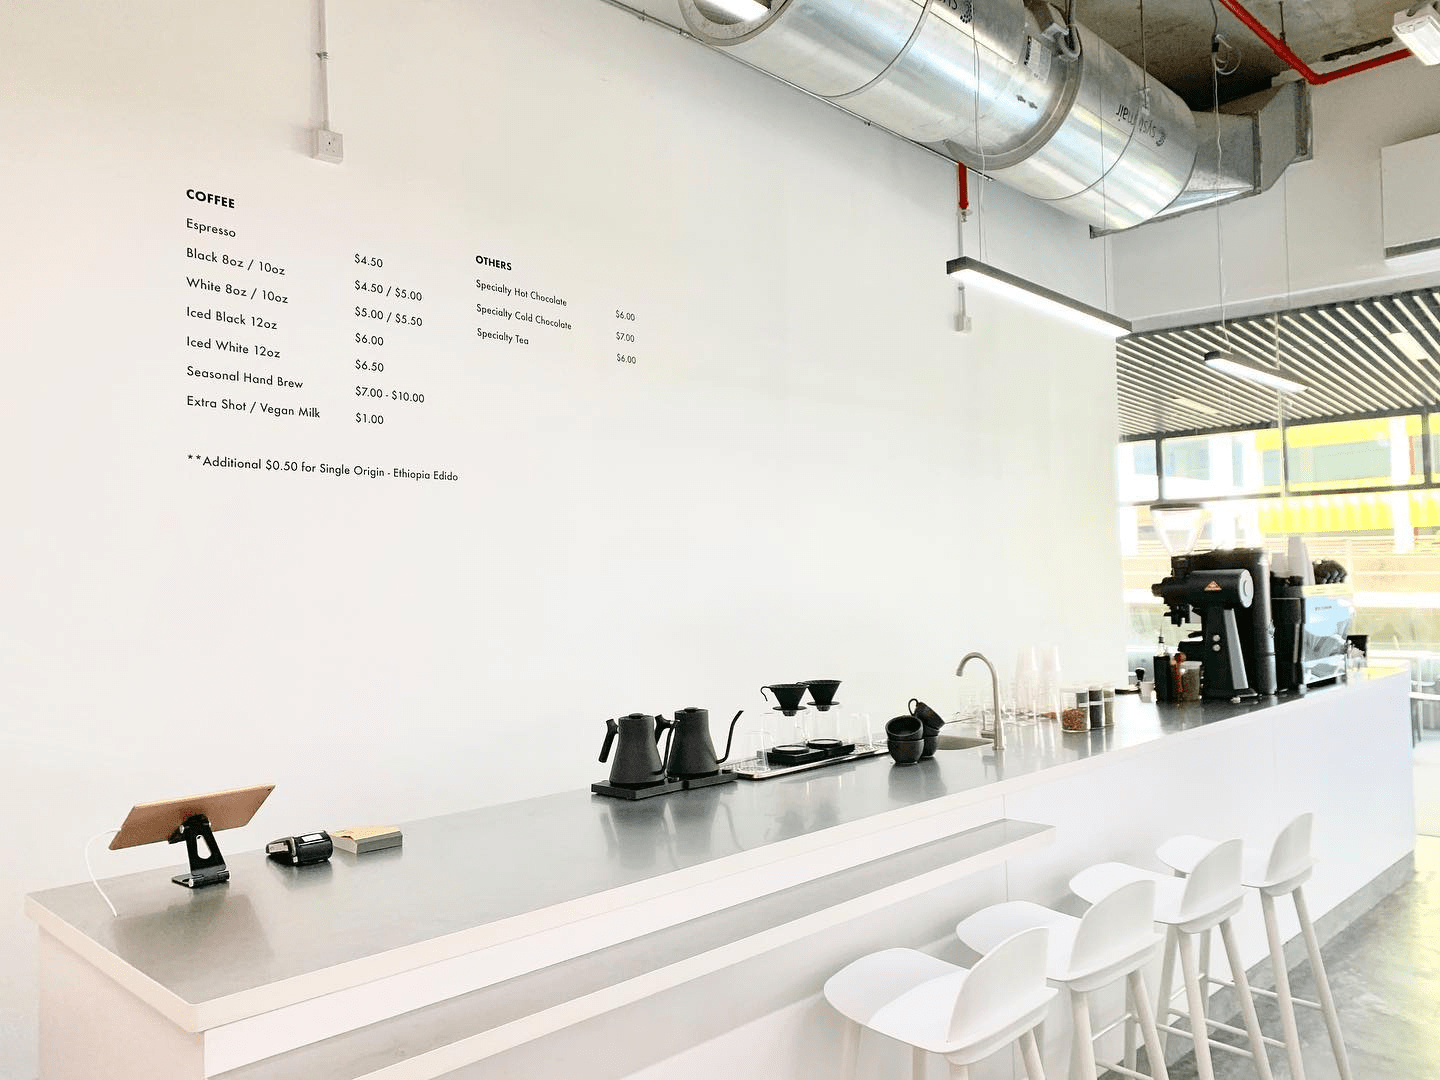 New Cafe August 2020 - Venture Drive Coffee